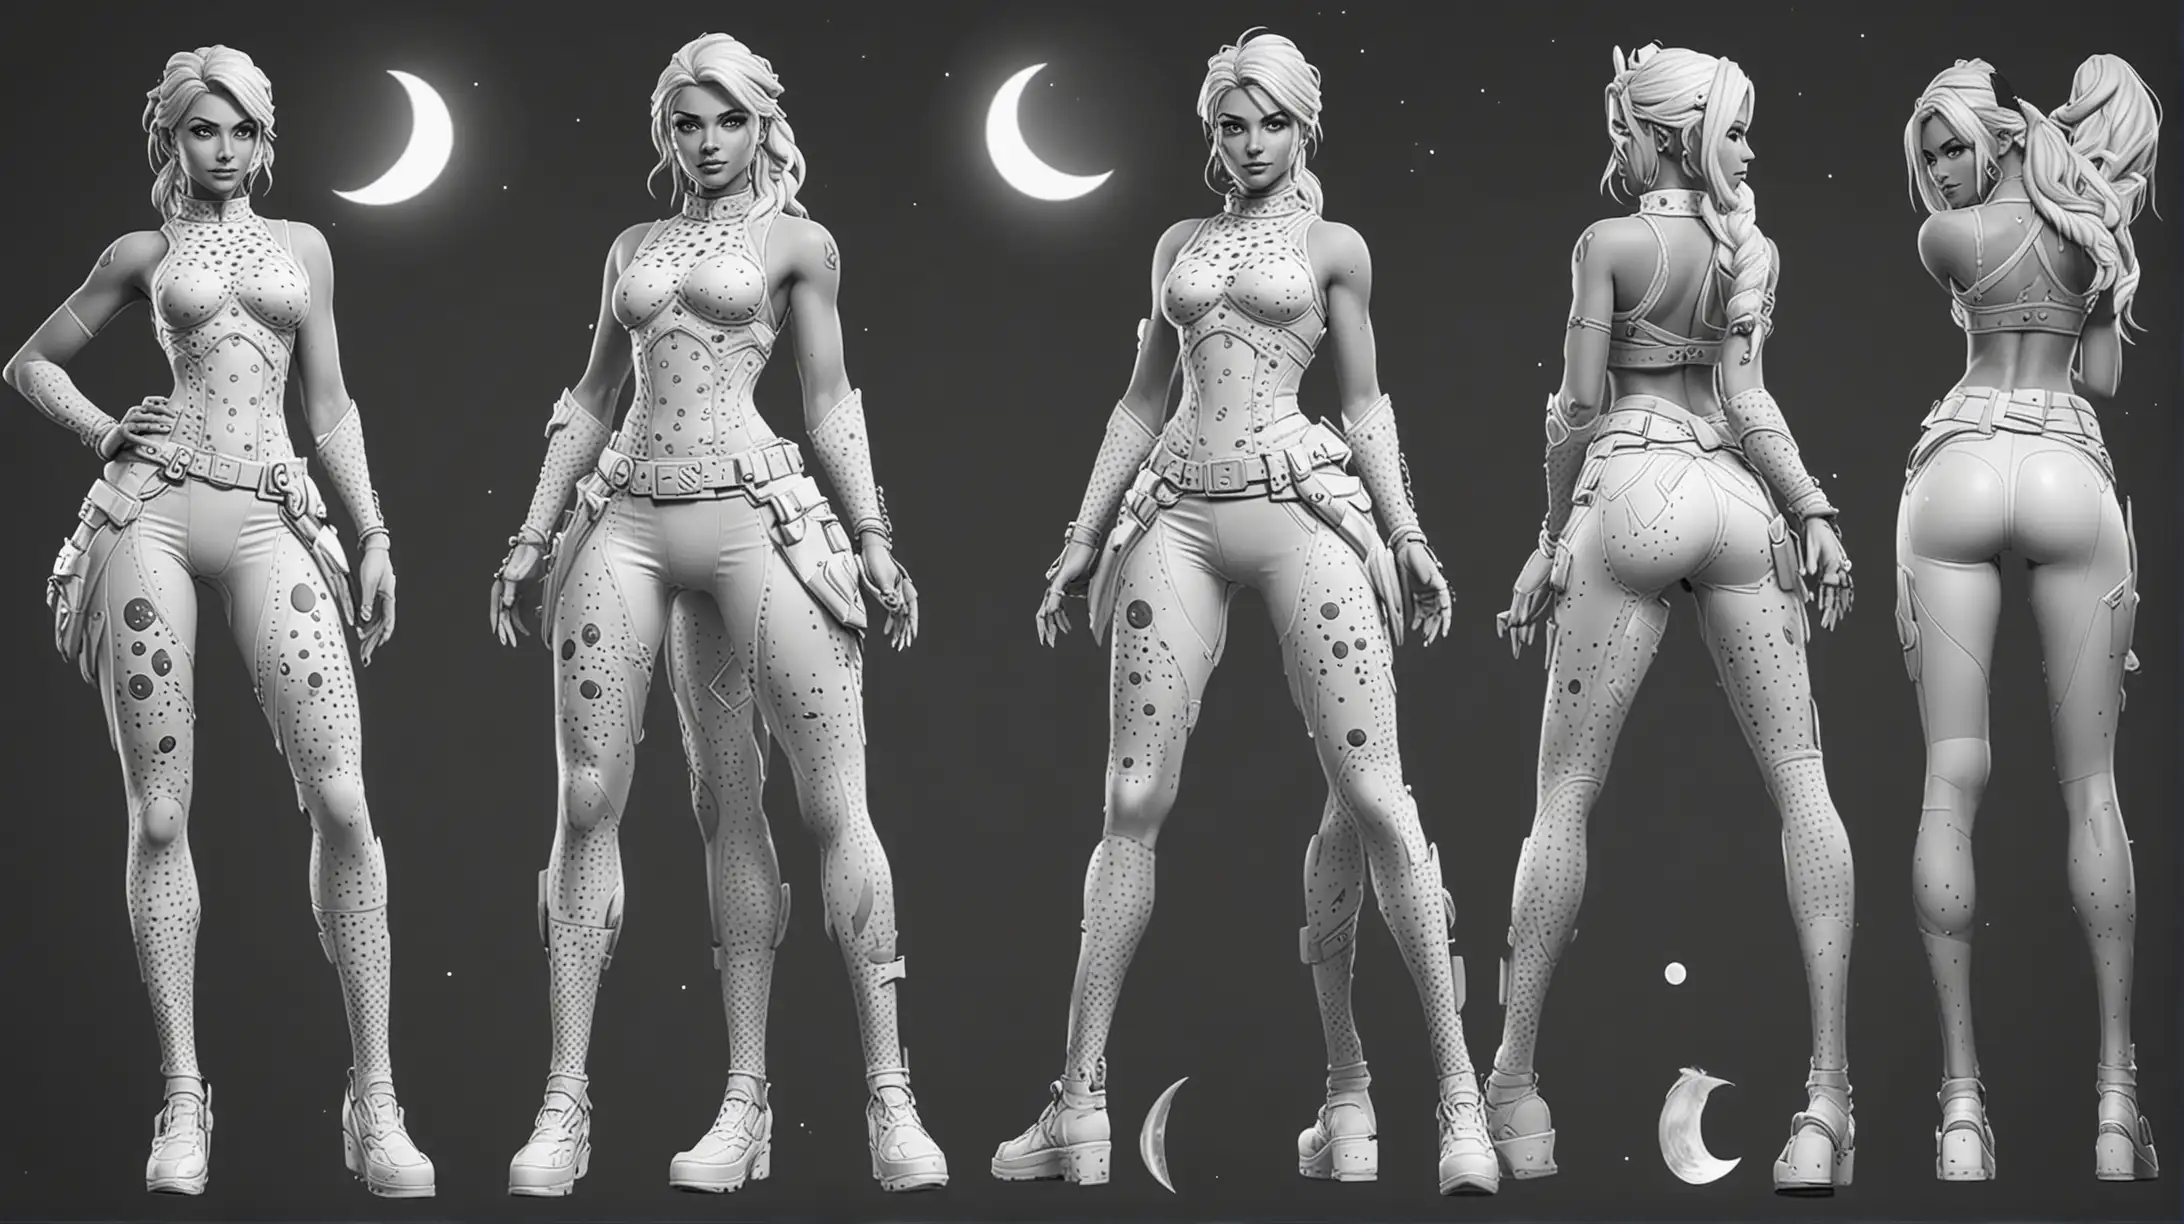 WHITE COLORING PAGES FORTNITE FULL BODY SKINS OF ARTEMIS WITH POLKA DOT PANTS, MOON DESIGNS